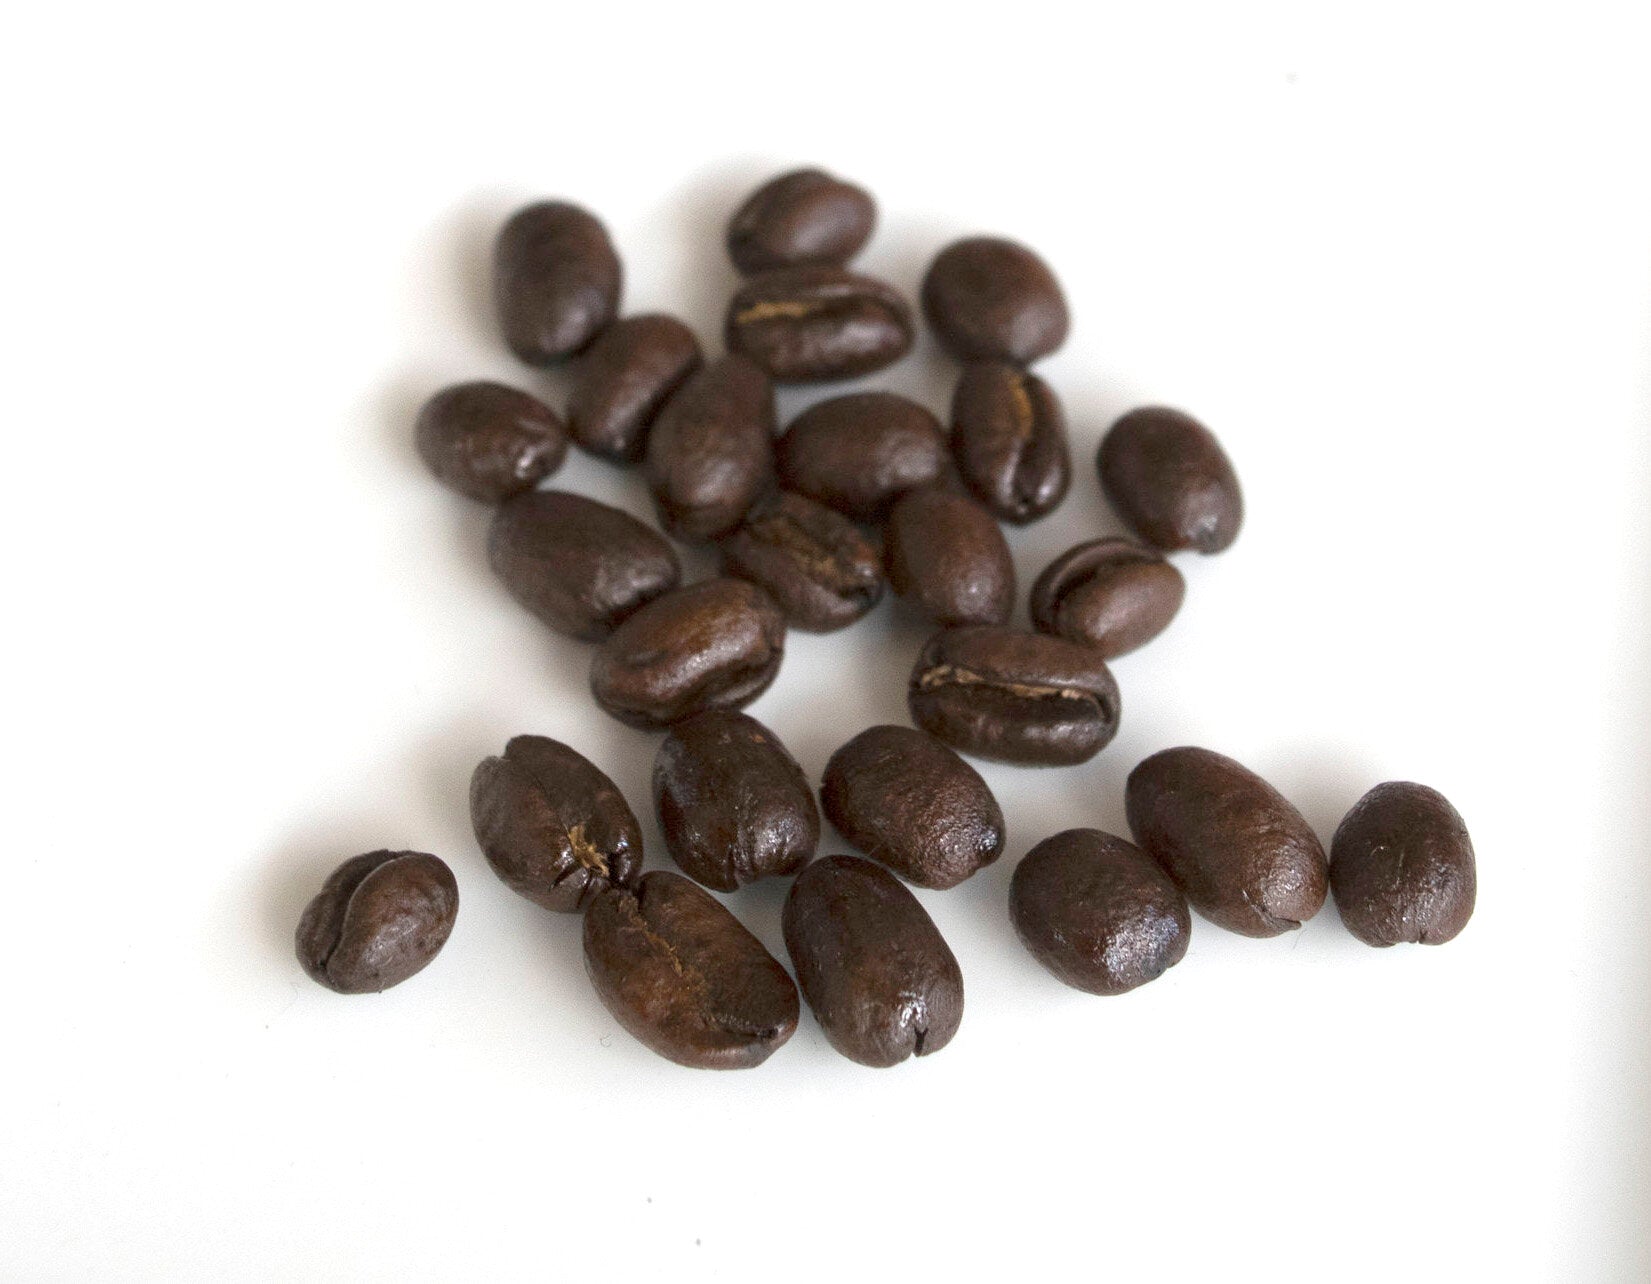 Peaberry is a classification of coffee beans that, through an anomaly in the growing process, only has one bean developed within the coffee cherry. PHOTO: Dayva Keolanui